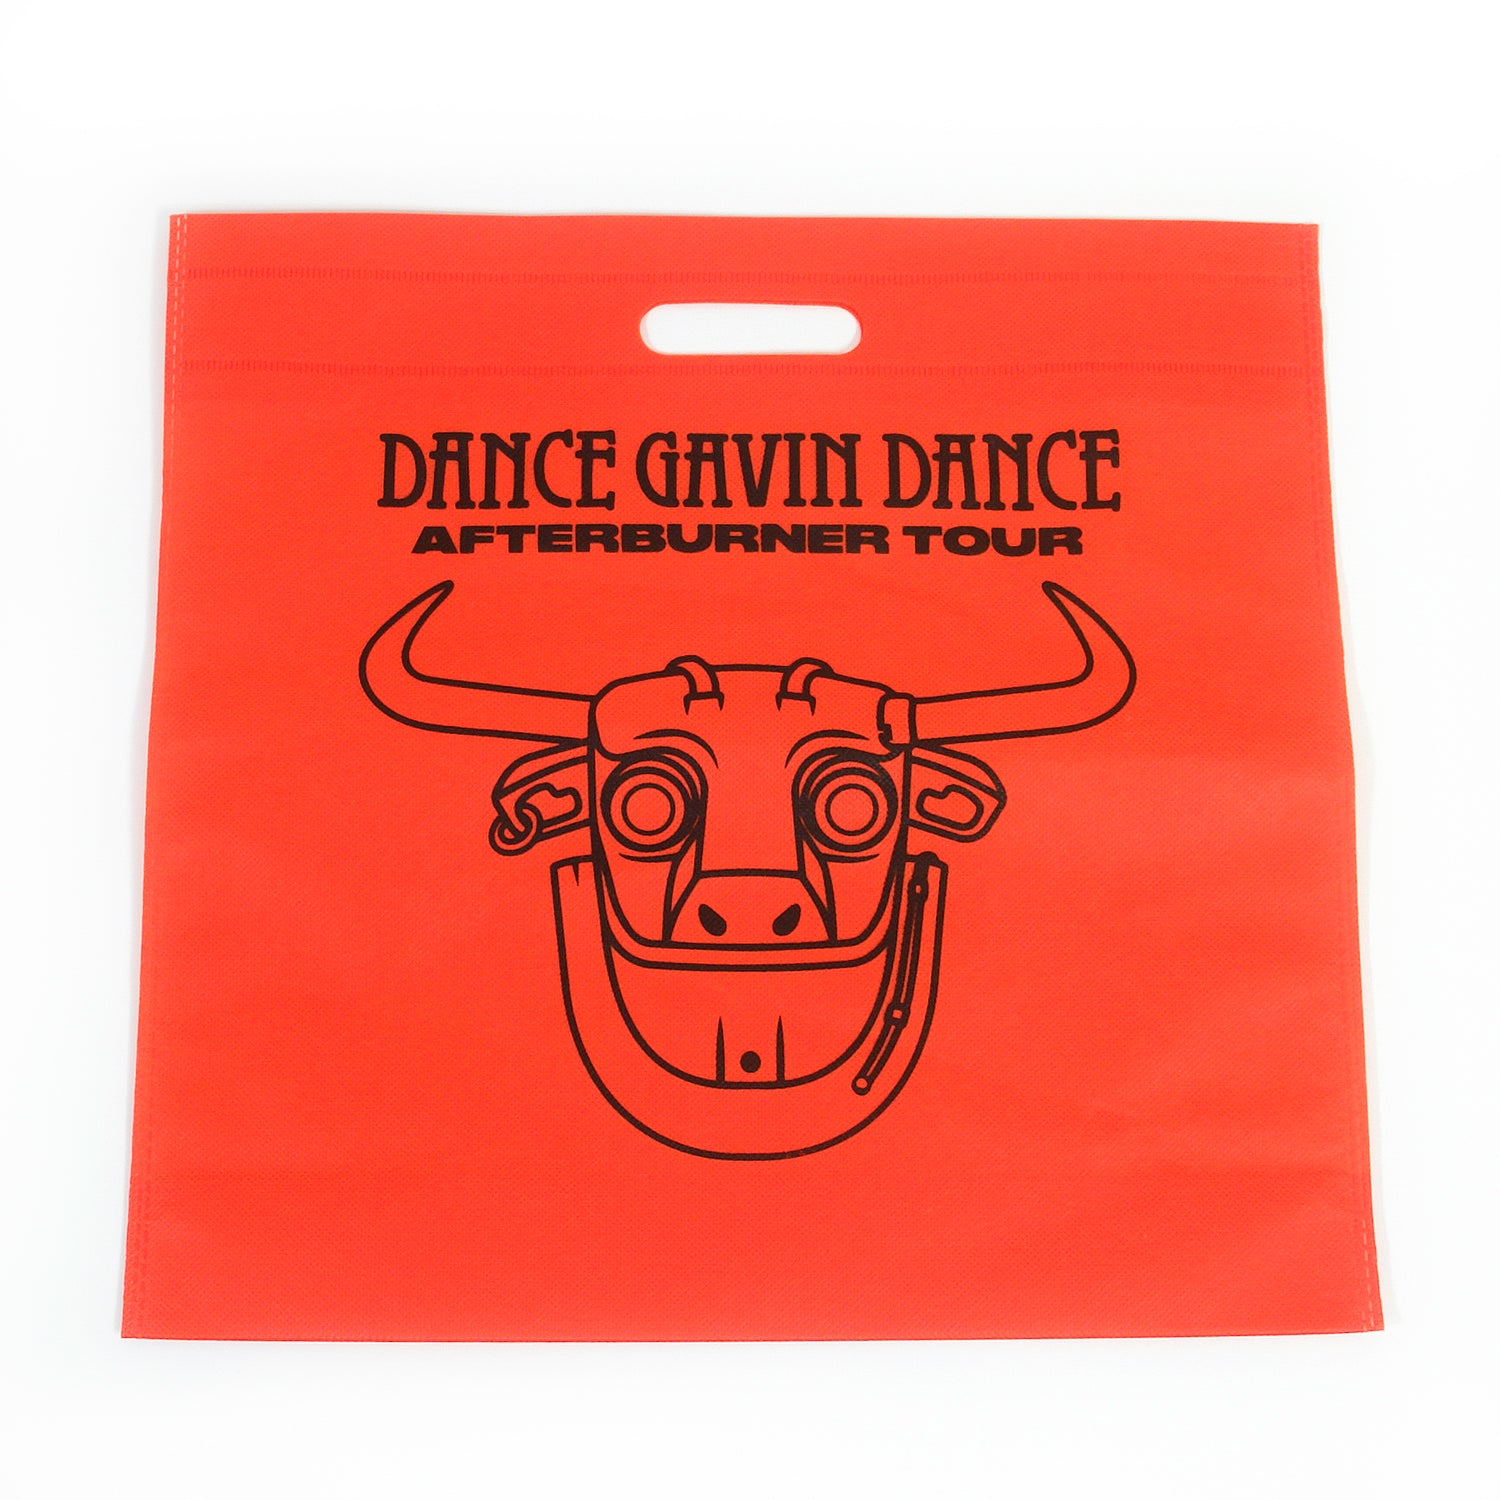 image if an orange canvas tote bag  on a white background. fell size bkack print of a robot bull's head. at the top says dance gavin dance afterburner tour